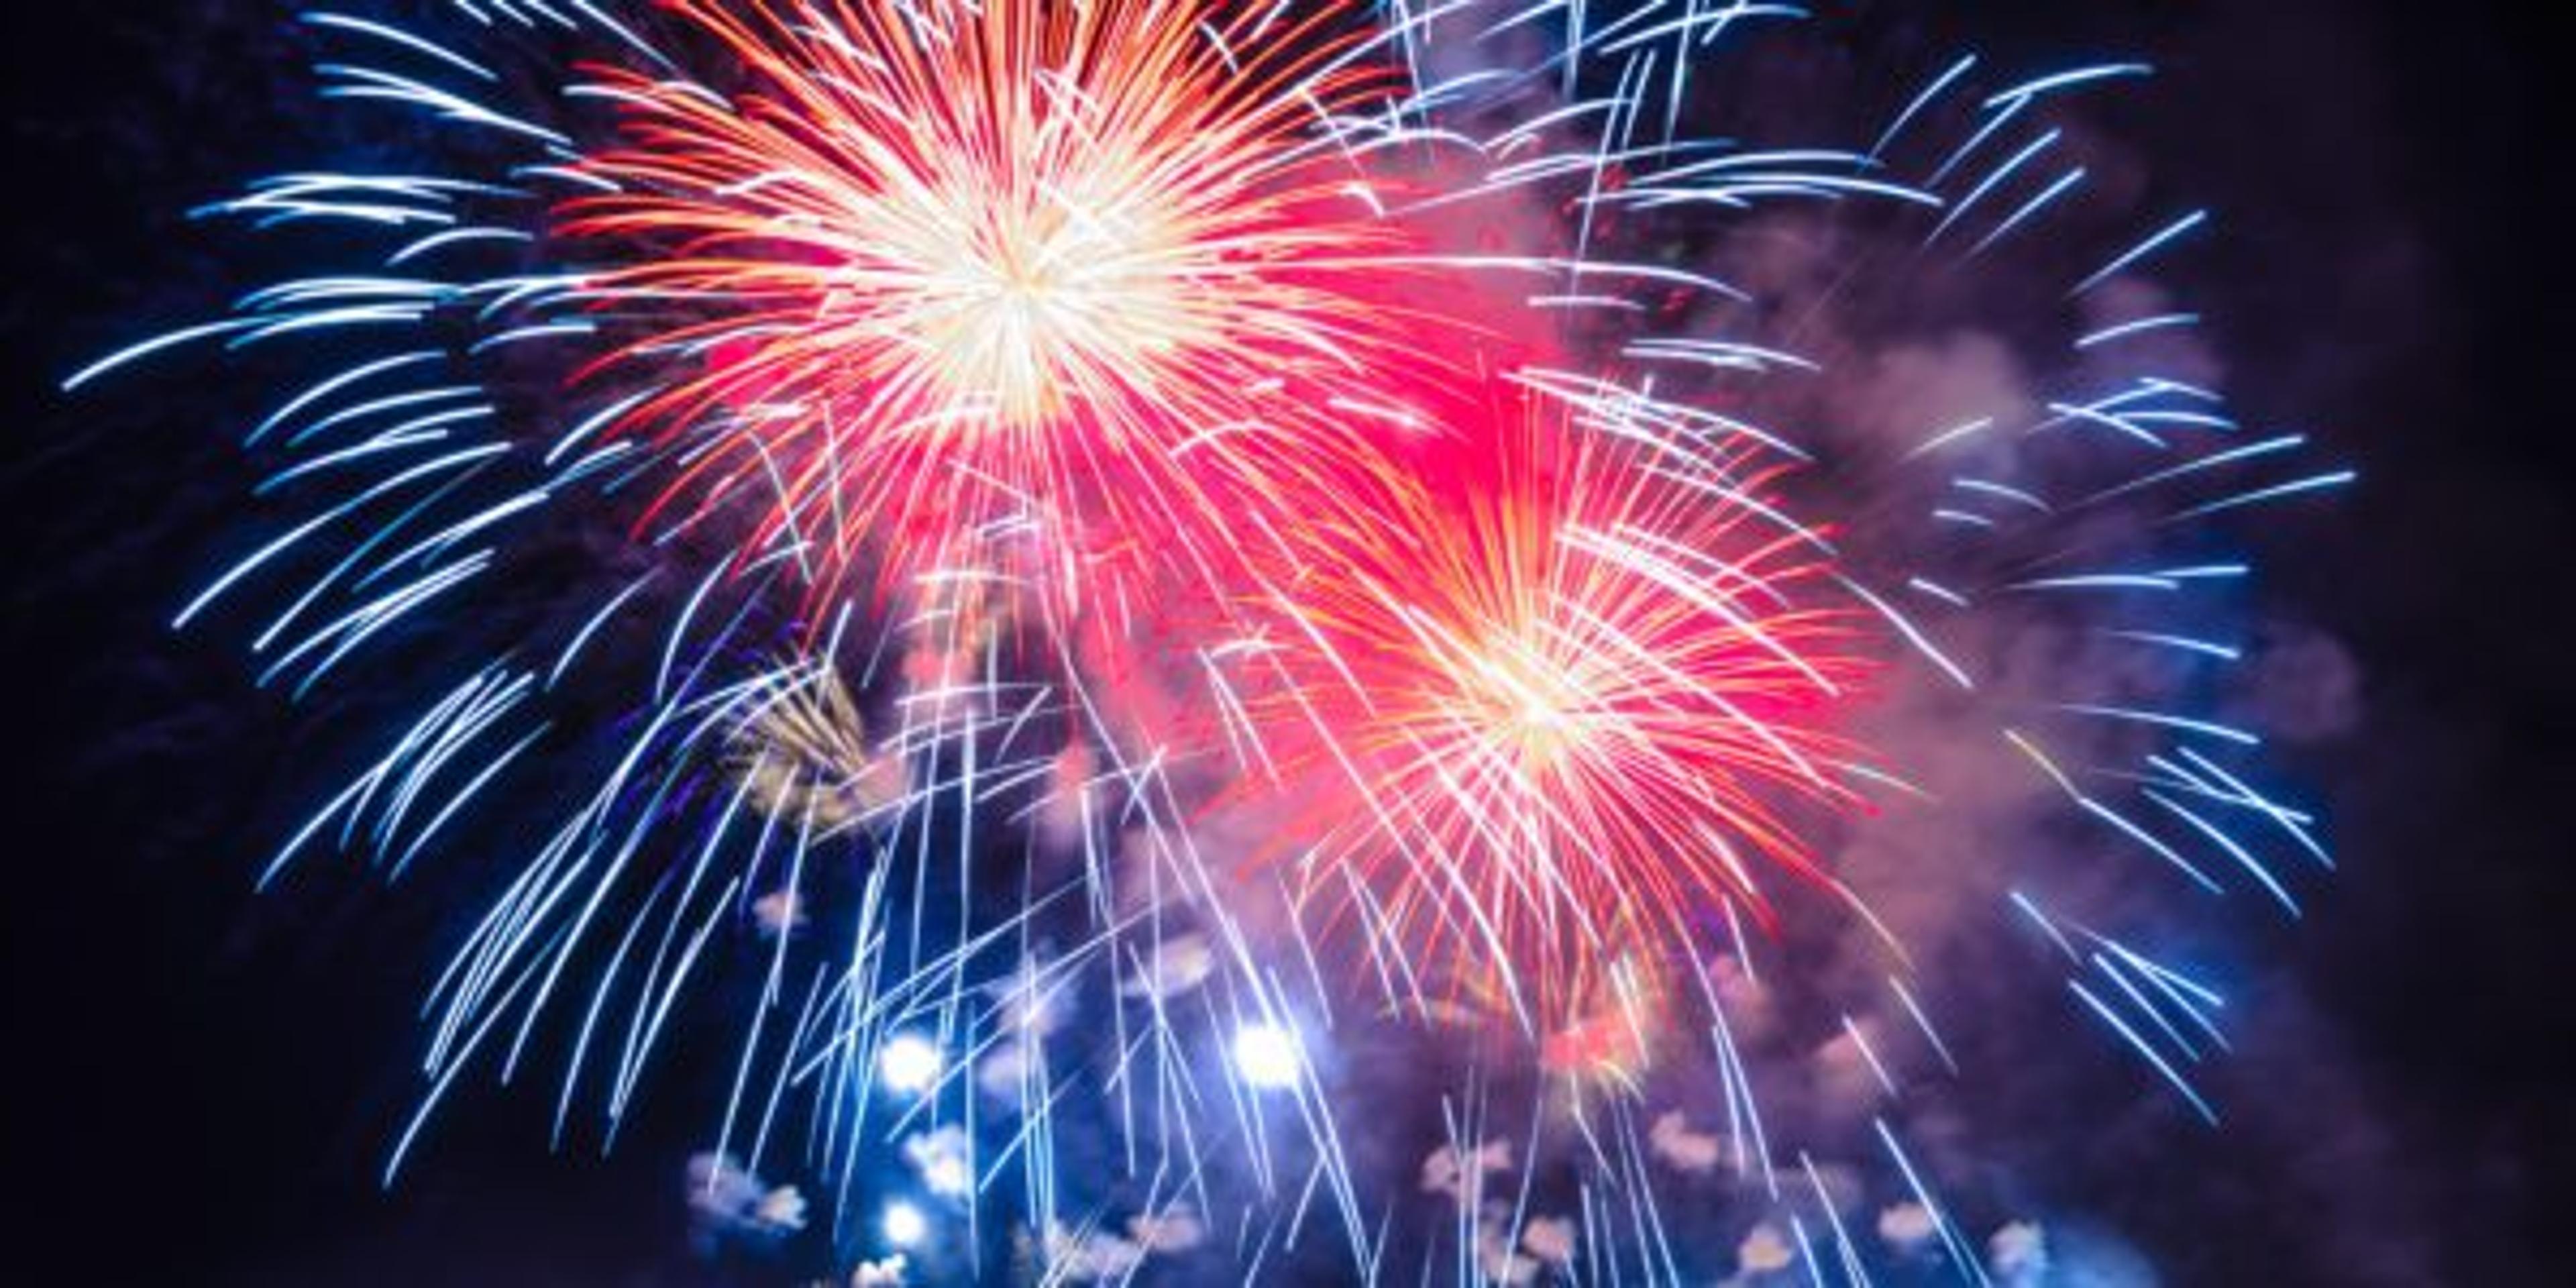 Looking for the best fireworks in Michigan in 2022? There are destination fireworks displays and festivals all over the state between June 24 and July 4.